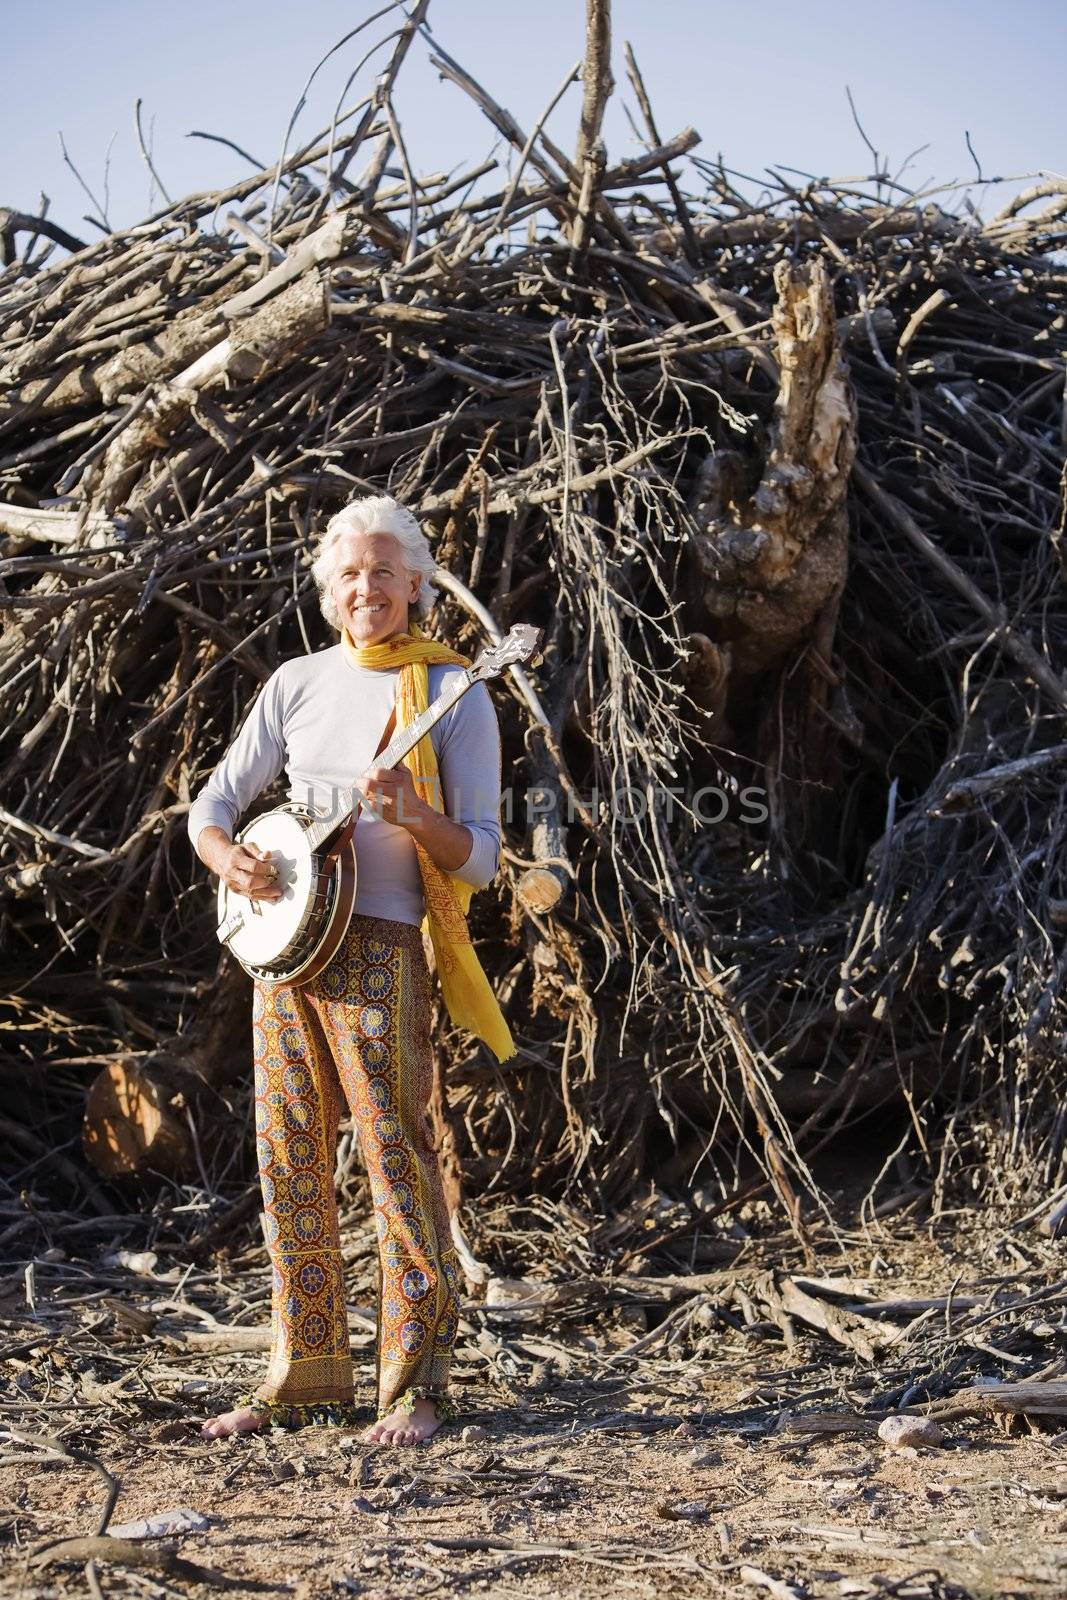 Barefoot banjo Player in Front of a Big Pile of Wood